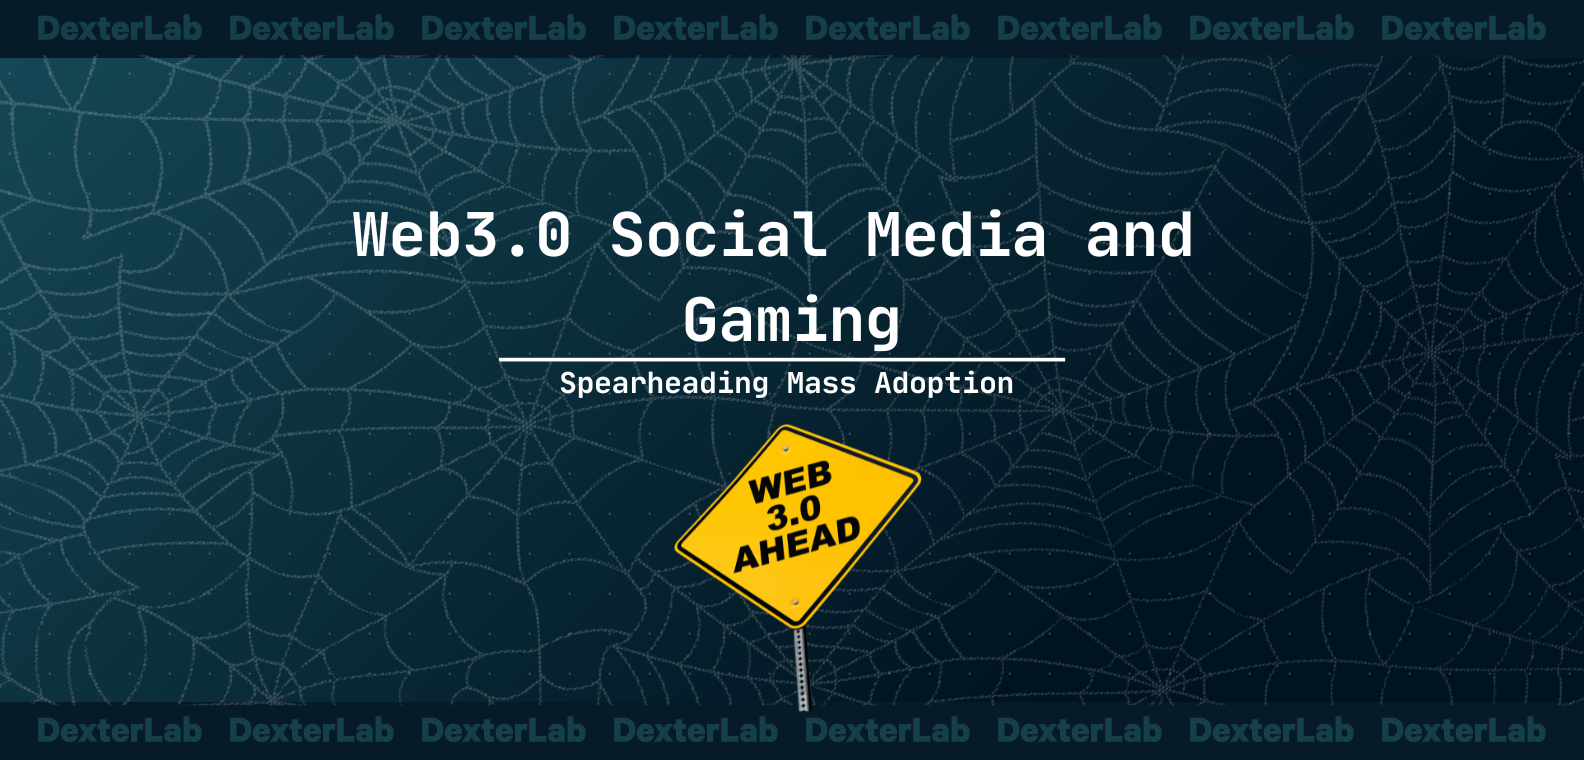 Gaming and Social Media in Web3: Spearheading Mass Adoption